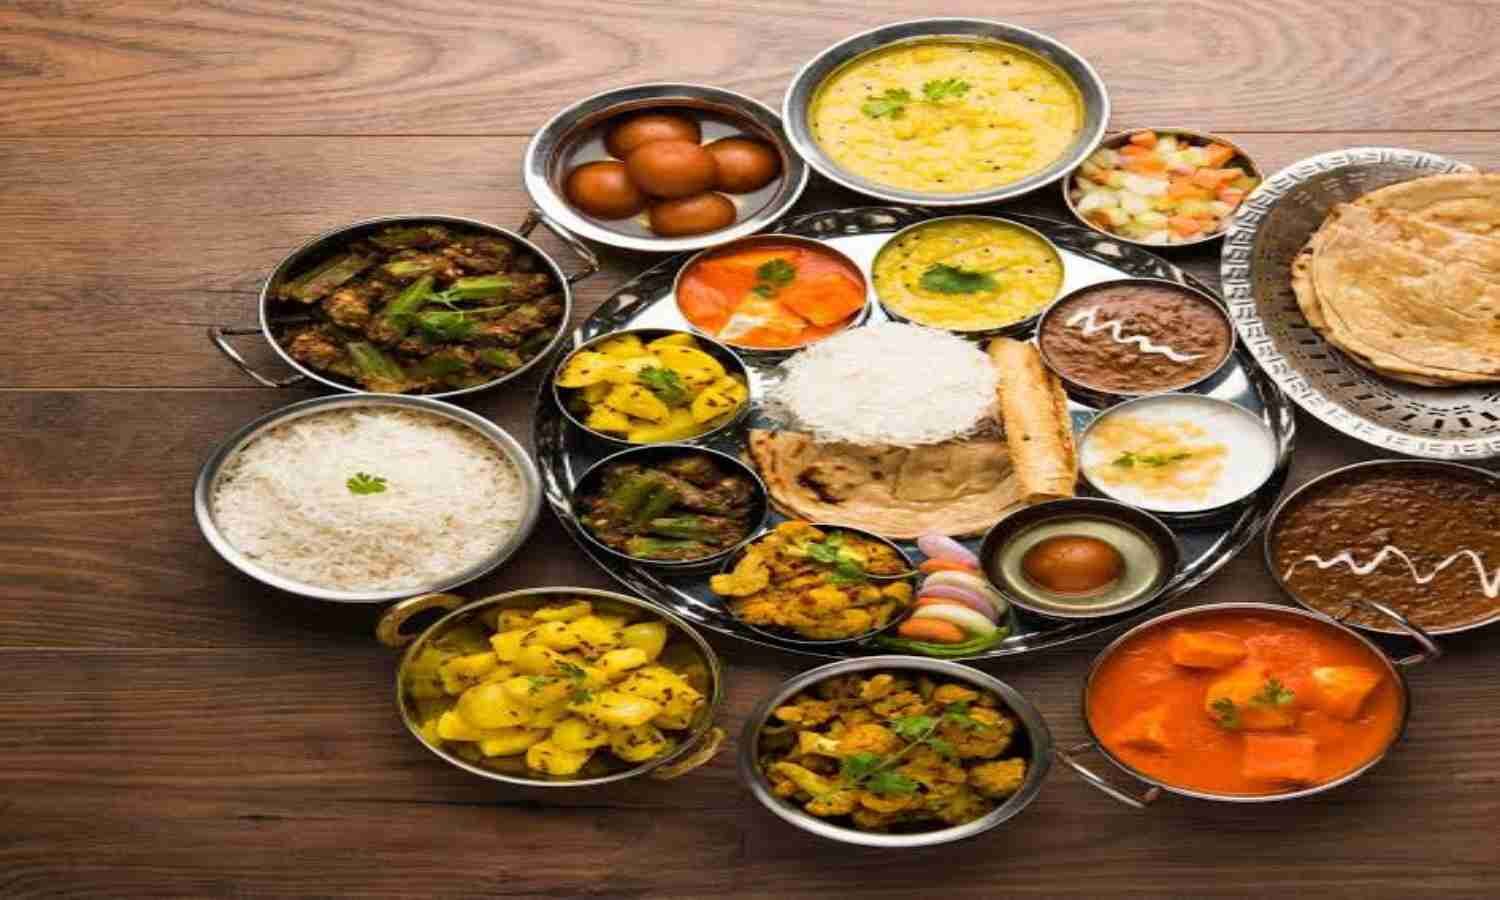 Famous Indian Food in Foreign: These 10 Indian dishes have the highest demand in foreign countries